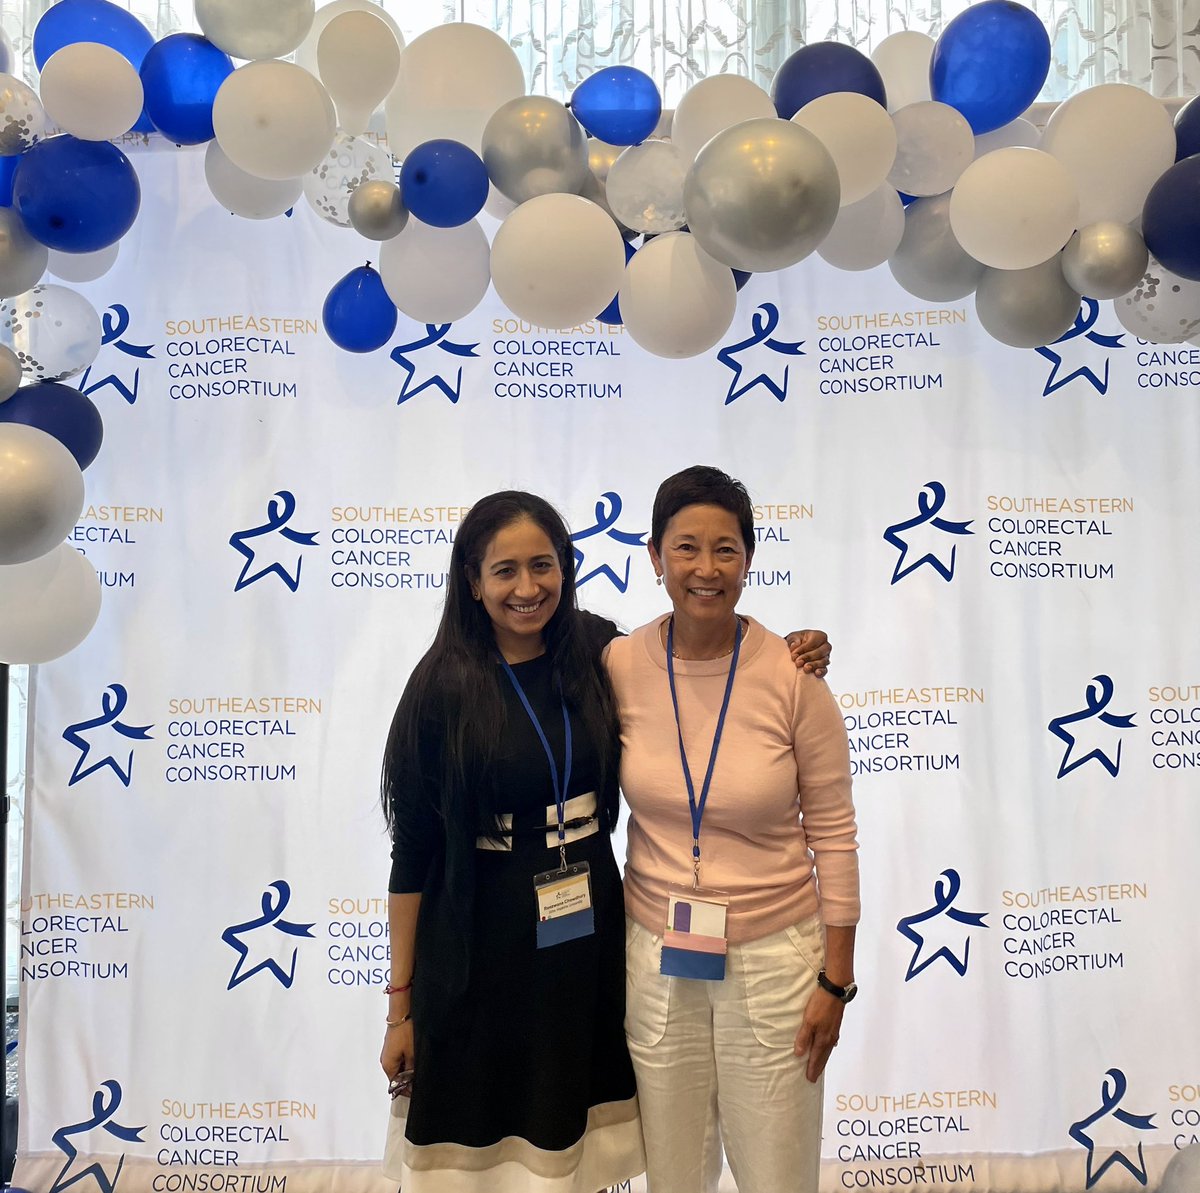 Thank you @se_crc @CindyDrYo for the invitation to represent @AmCollegeGastro @HopkinsGIHep at this wonderful conference. Privilege to highlight #RideOrStrideFor45 #TuneitUp during #CRCawarenessmonth! #45isthenew50 #ACGproud #WomeninGI